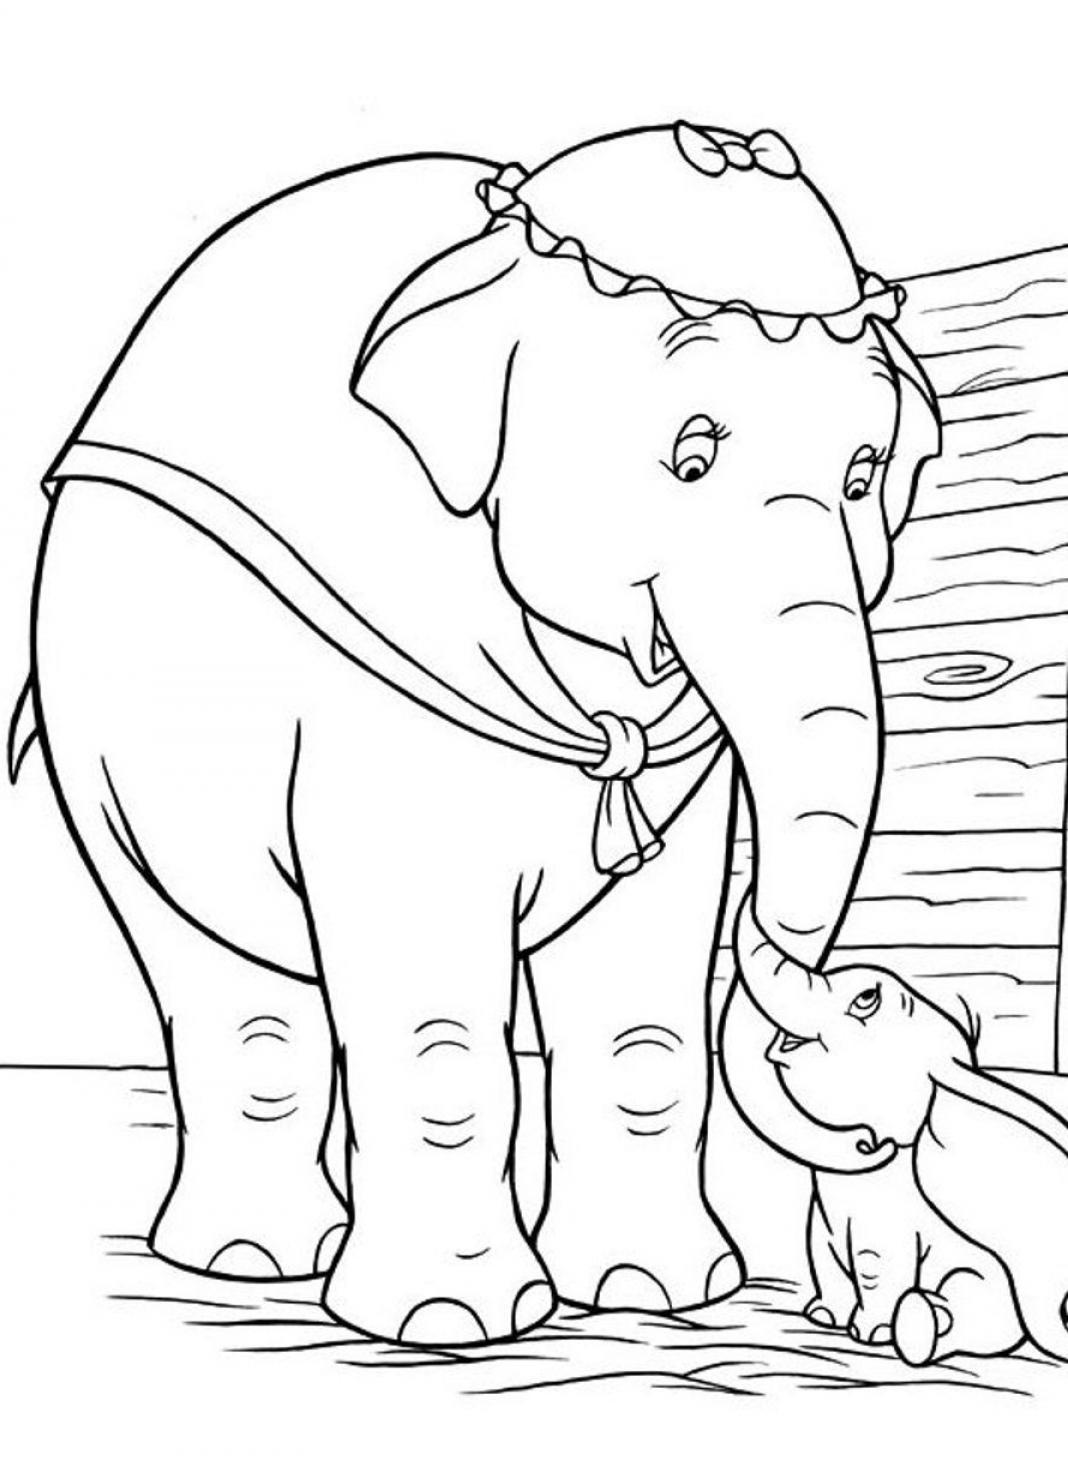 Free Dumbo Coloring Pages To Print - SheetalColor.com